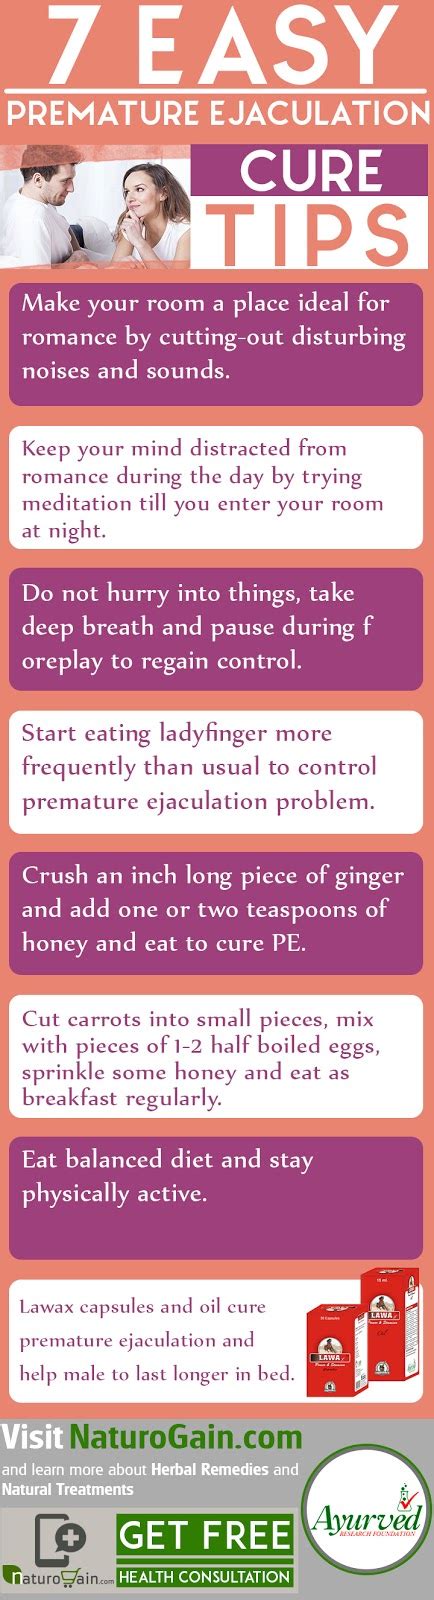 Premature ejaculation is quick and uncontrolled ejaculation in less than a minute after intercourse. Premature Ejaculation Cure Tips and Home Remedies that Work